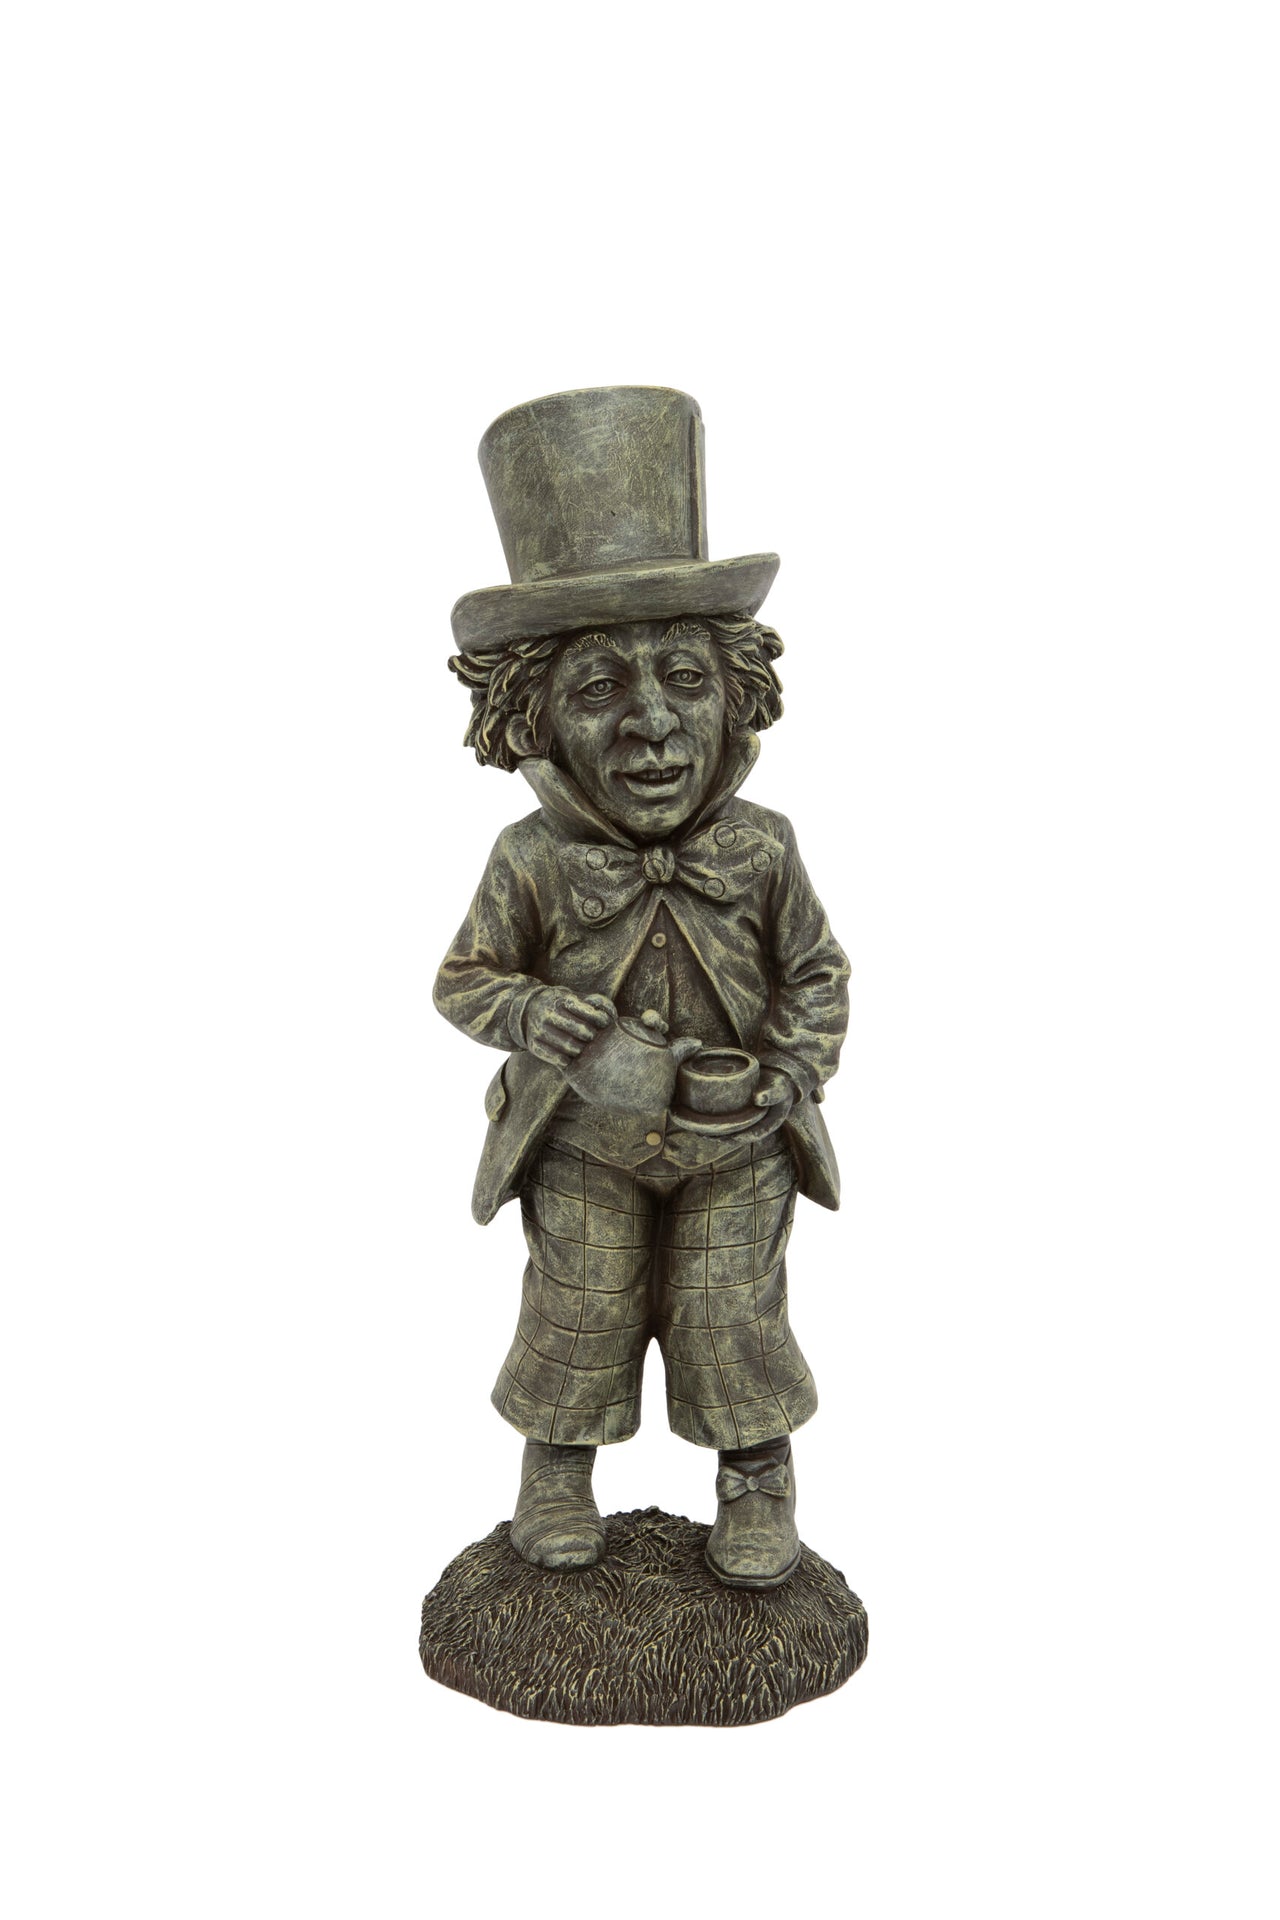 London Ornaments Mad Hatter Character Statue